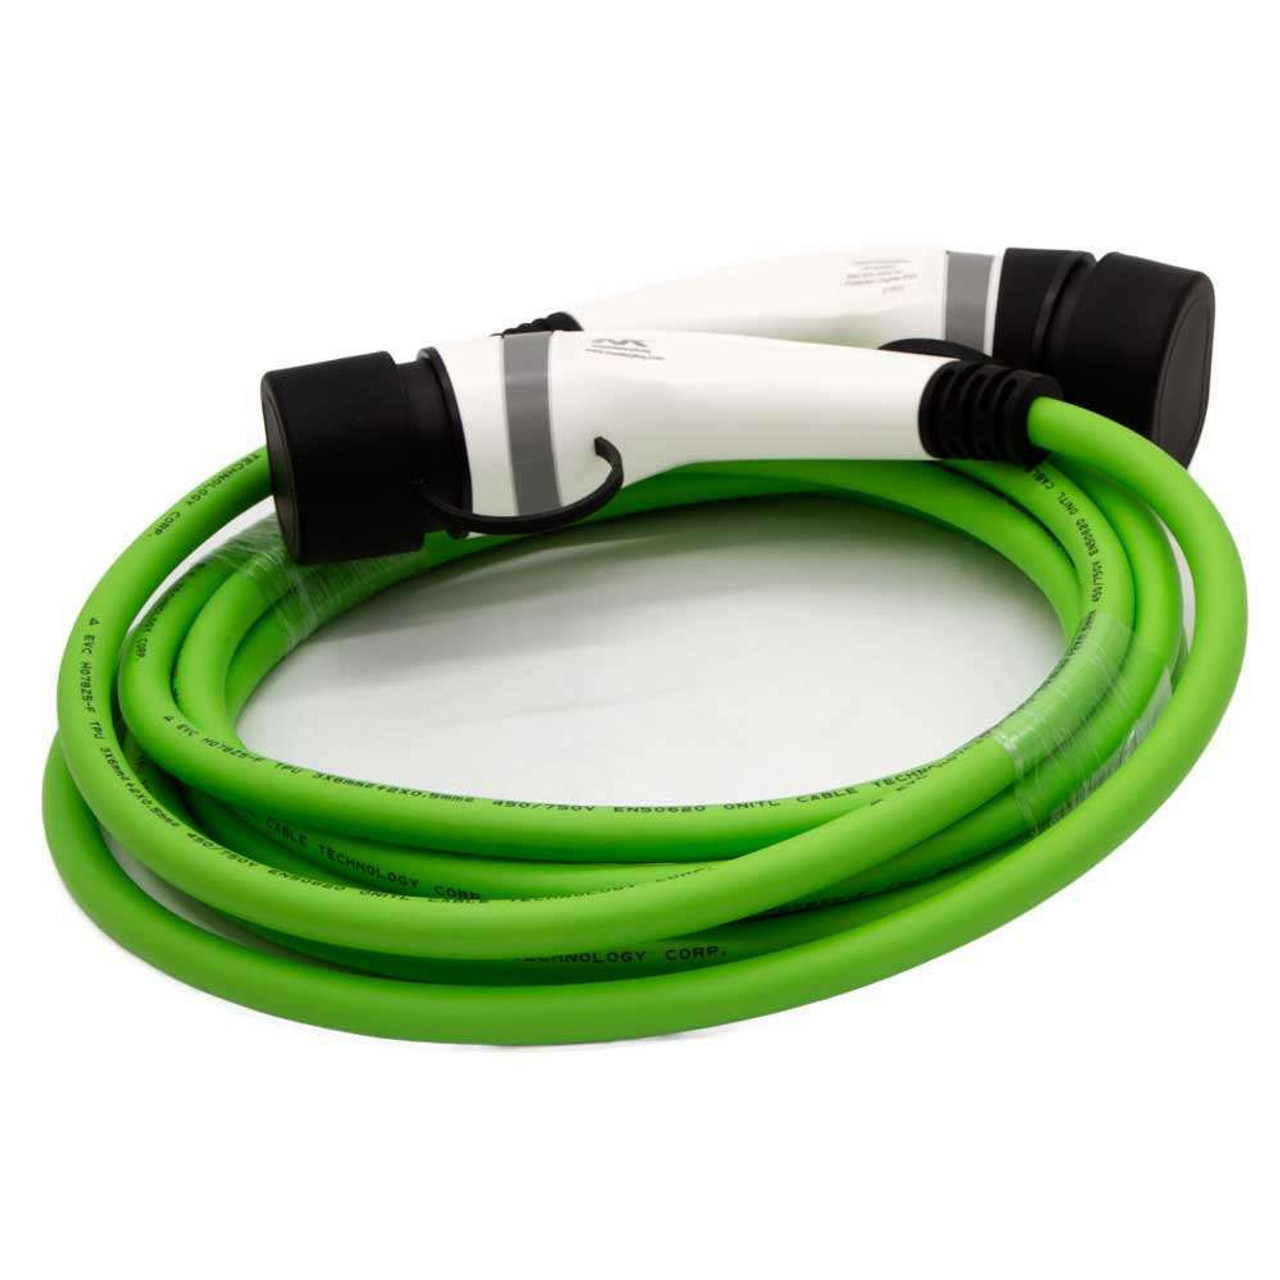 Portable EV Charging Cable 32A 22KW 3 Phase Electric Vehicle Cord